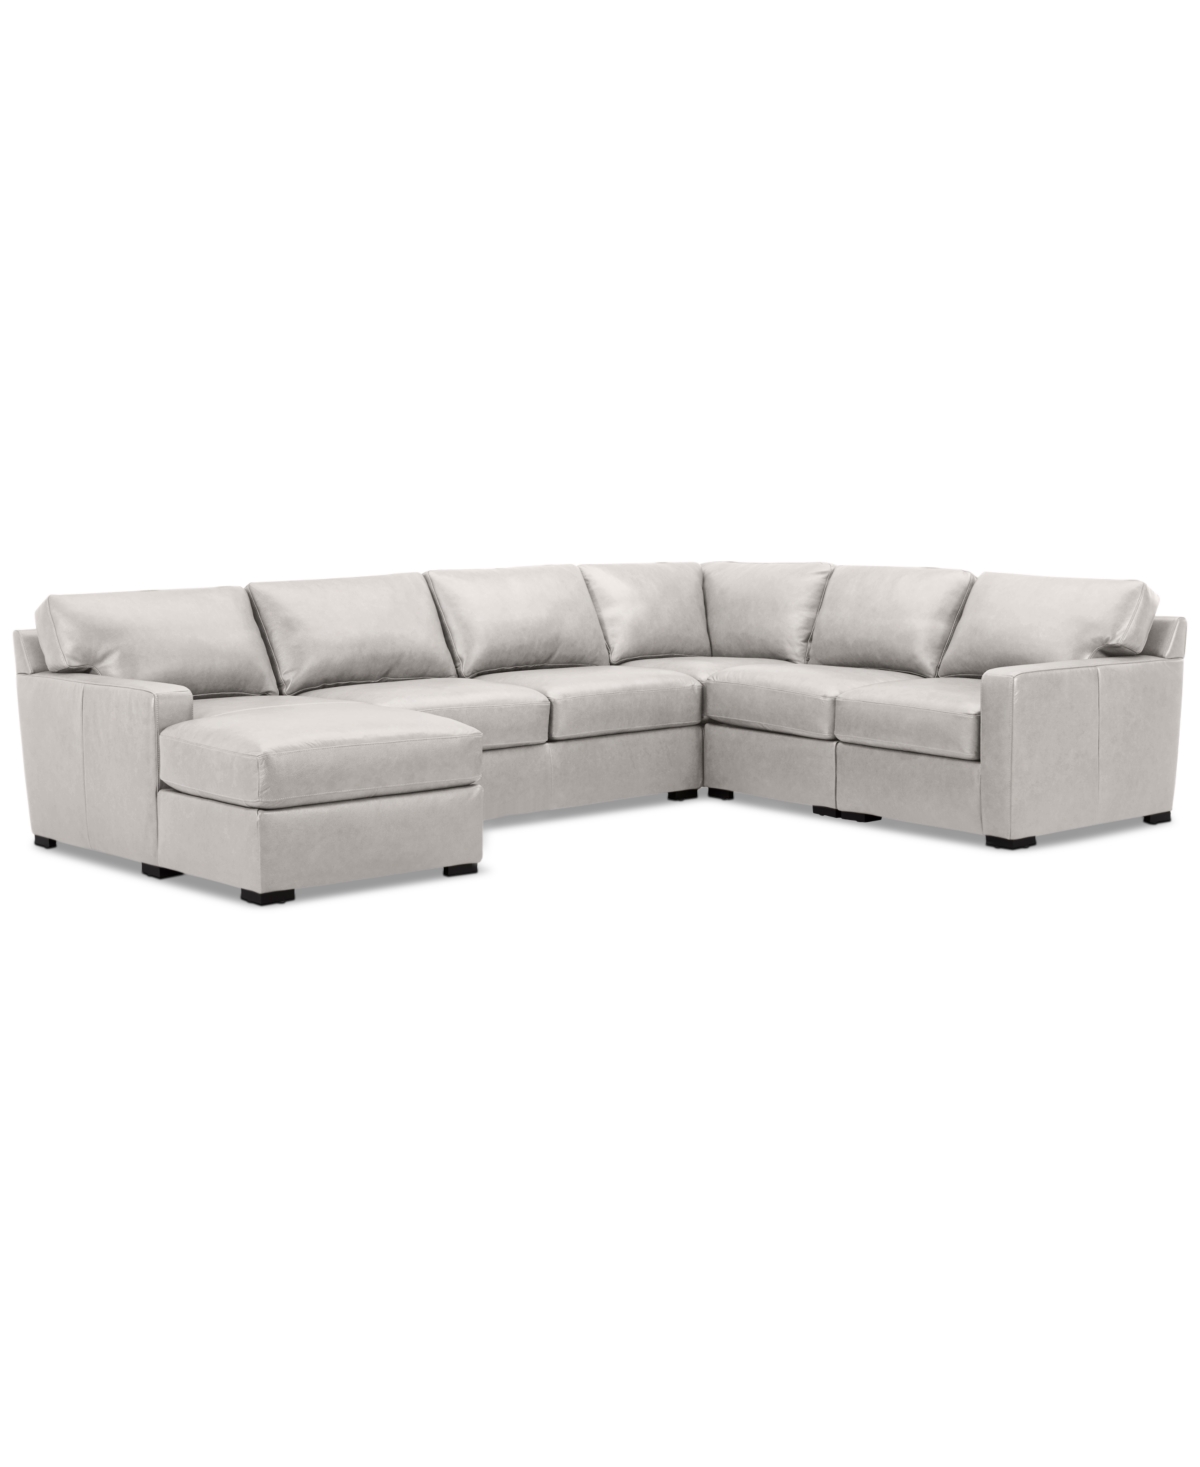 Macy's Radley 136" 5-pc. Leather Square Corner Modular Chase Sectional, Created For  In Ash